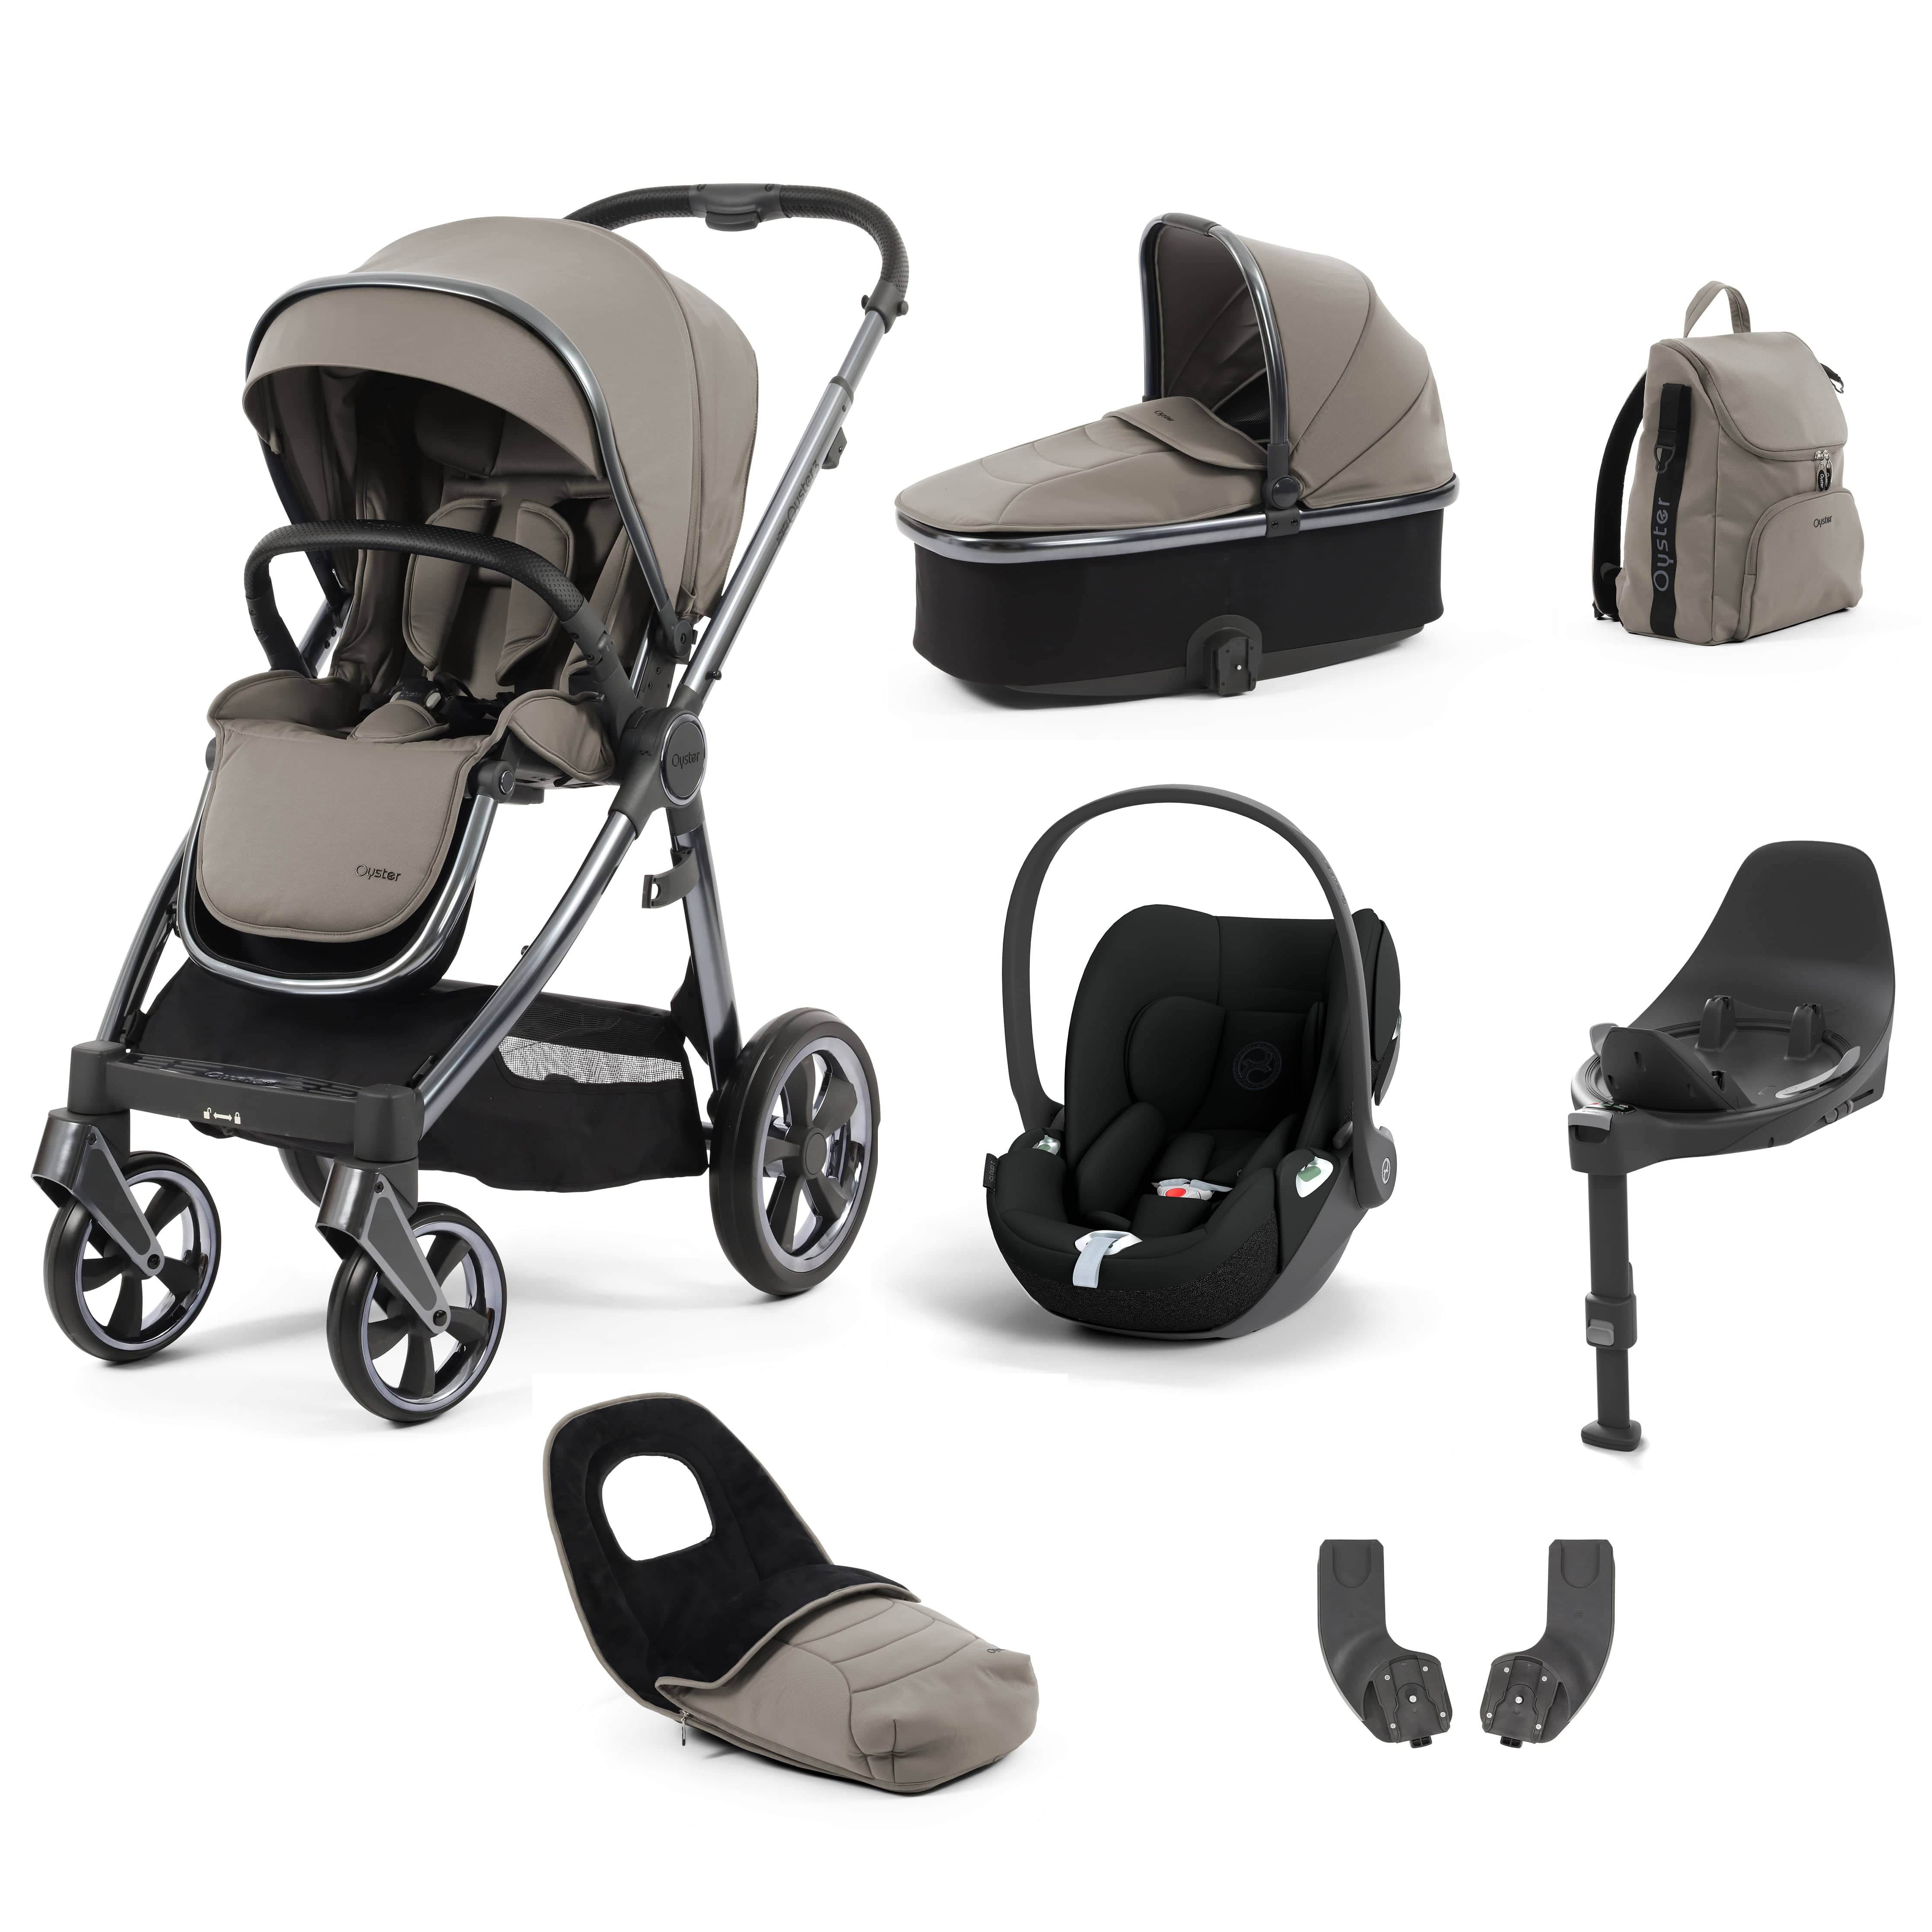 Babystyle Oyster 3 Luxury 7 Piece with Car Seat Bundle in Stone Travel Systems 14802-STN 5060711567259